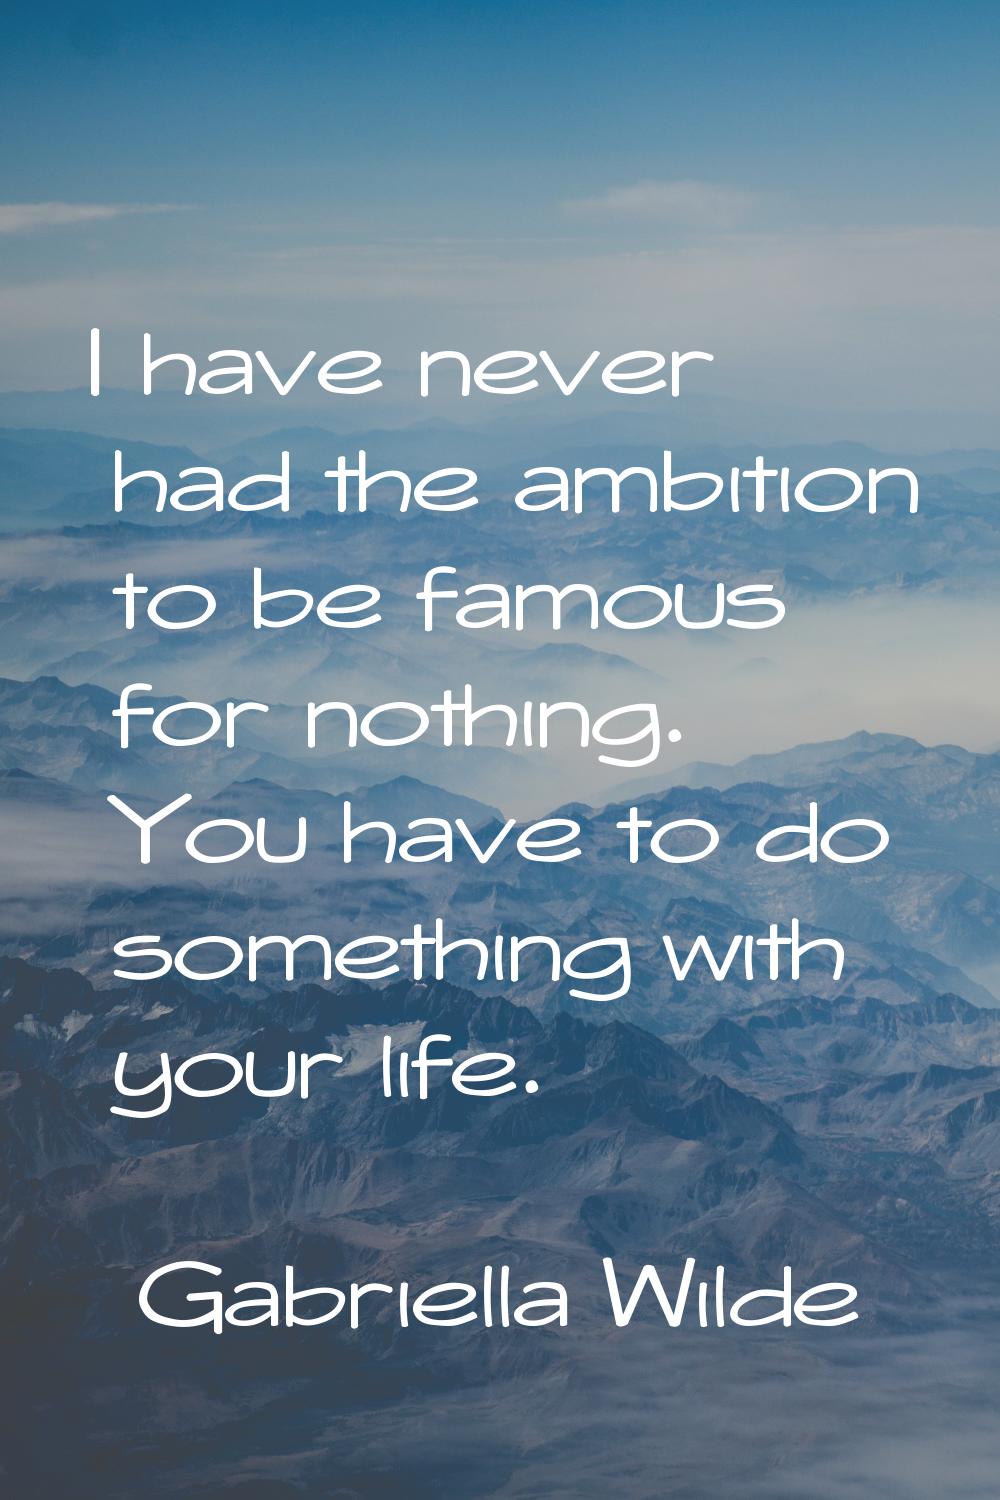 I have never had the ambition to be famous for nothing. You have to do something with your life.